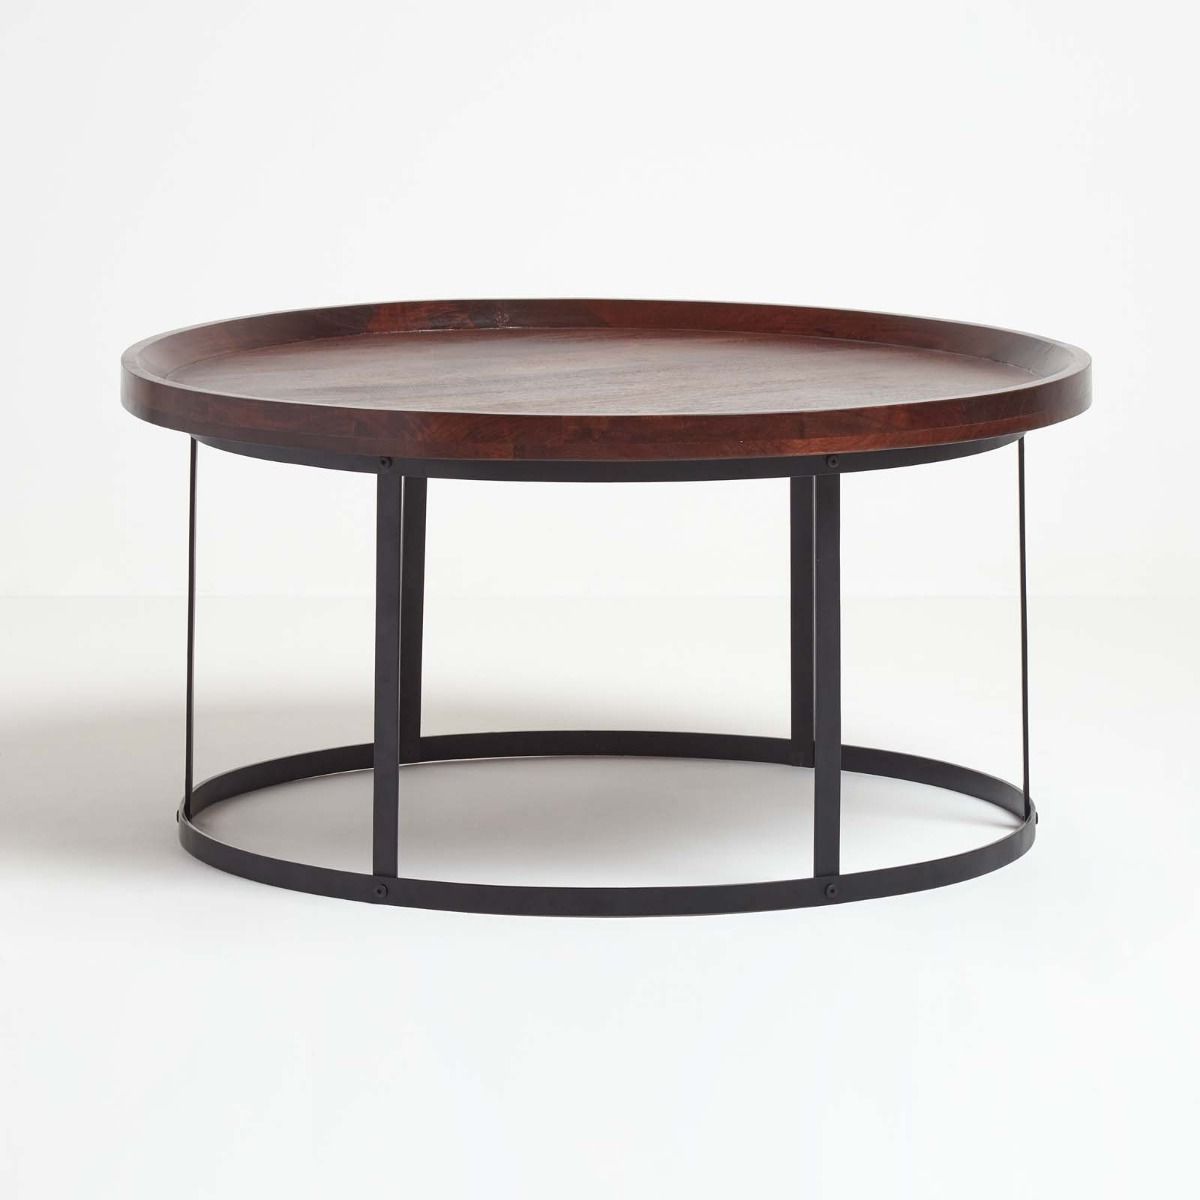 Most Recently Released Industrial Round Coffee Table With Dark Wood Top And Steel Frame Inside Coffee Tables With Round Wooden Tops (View 6 of 10)